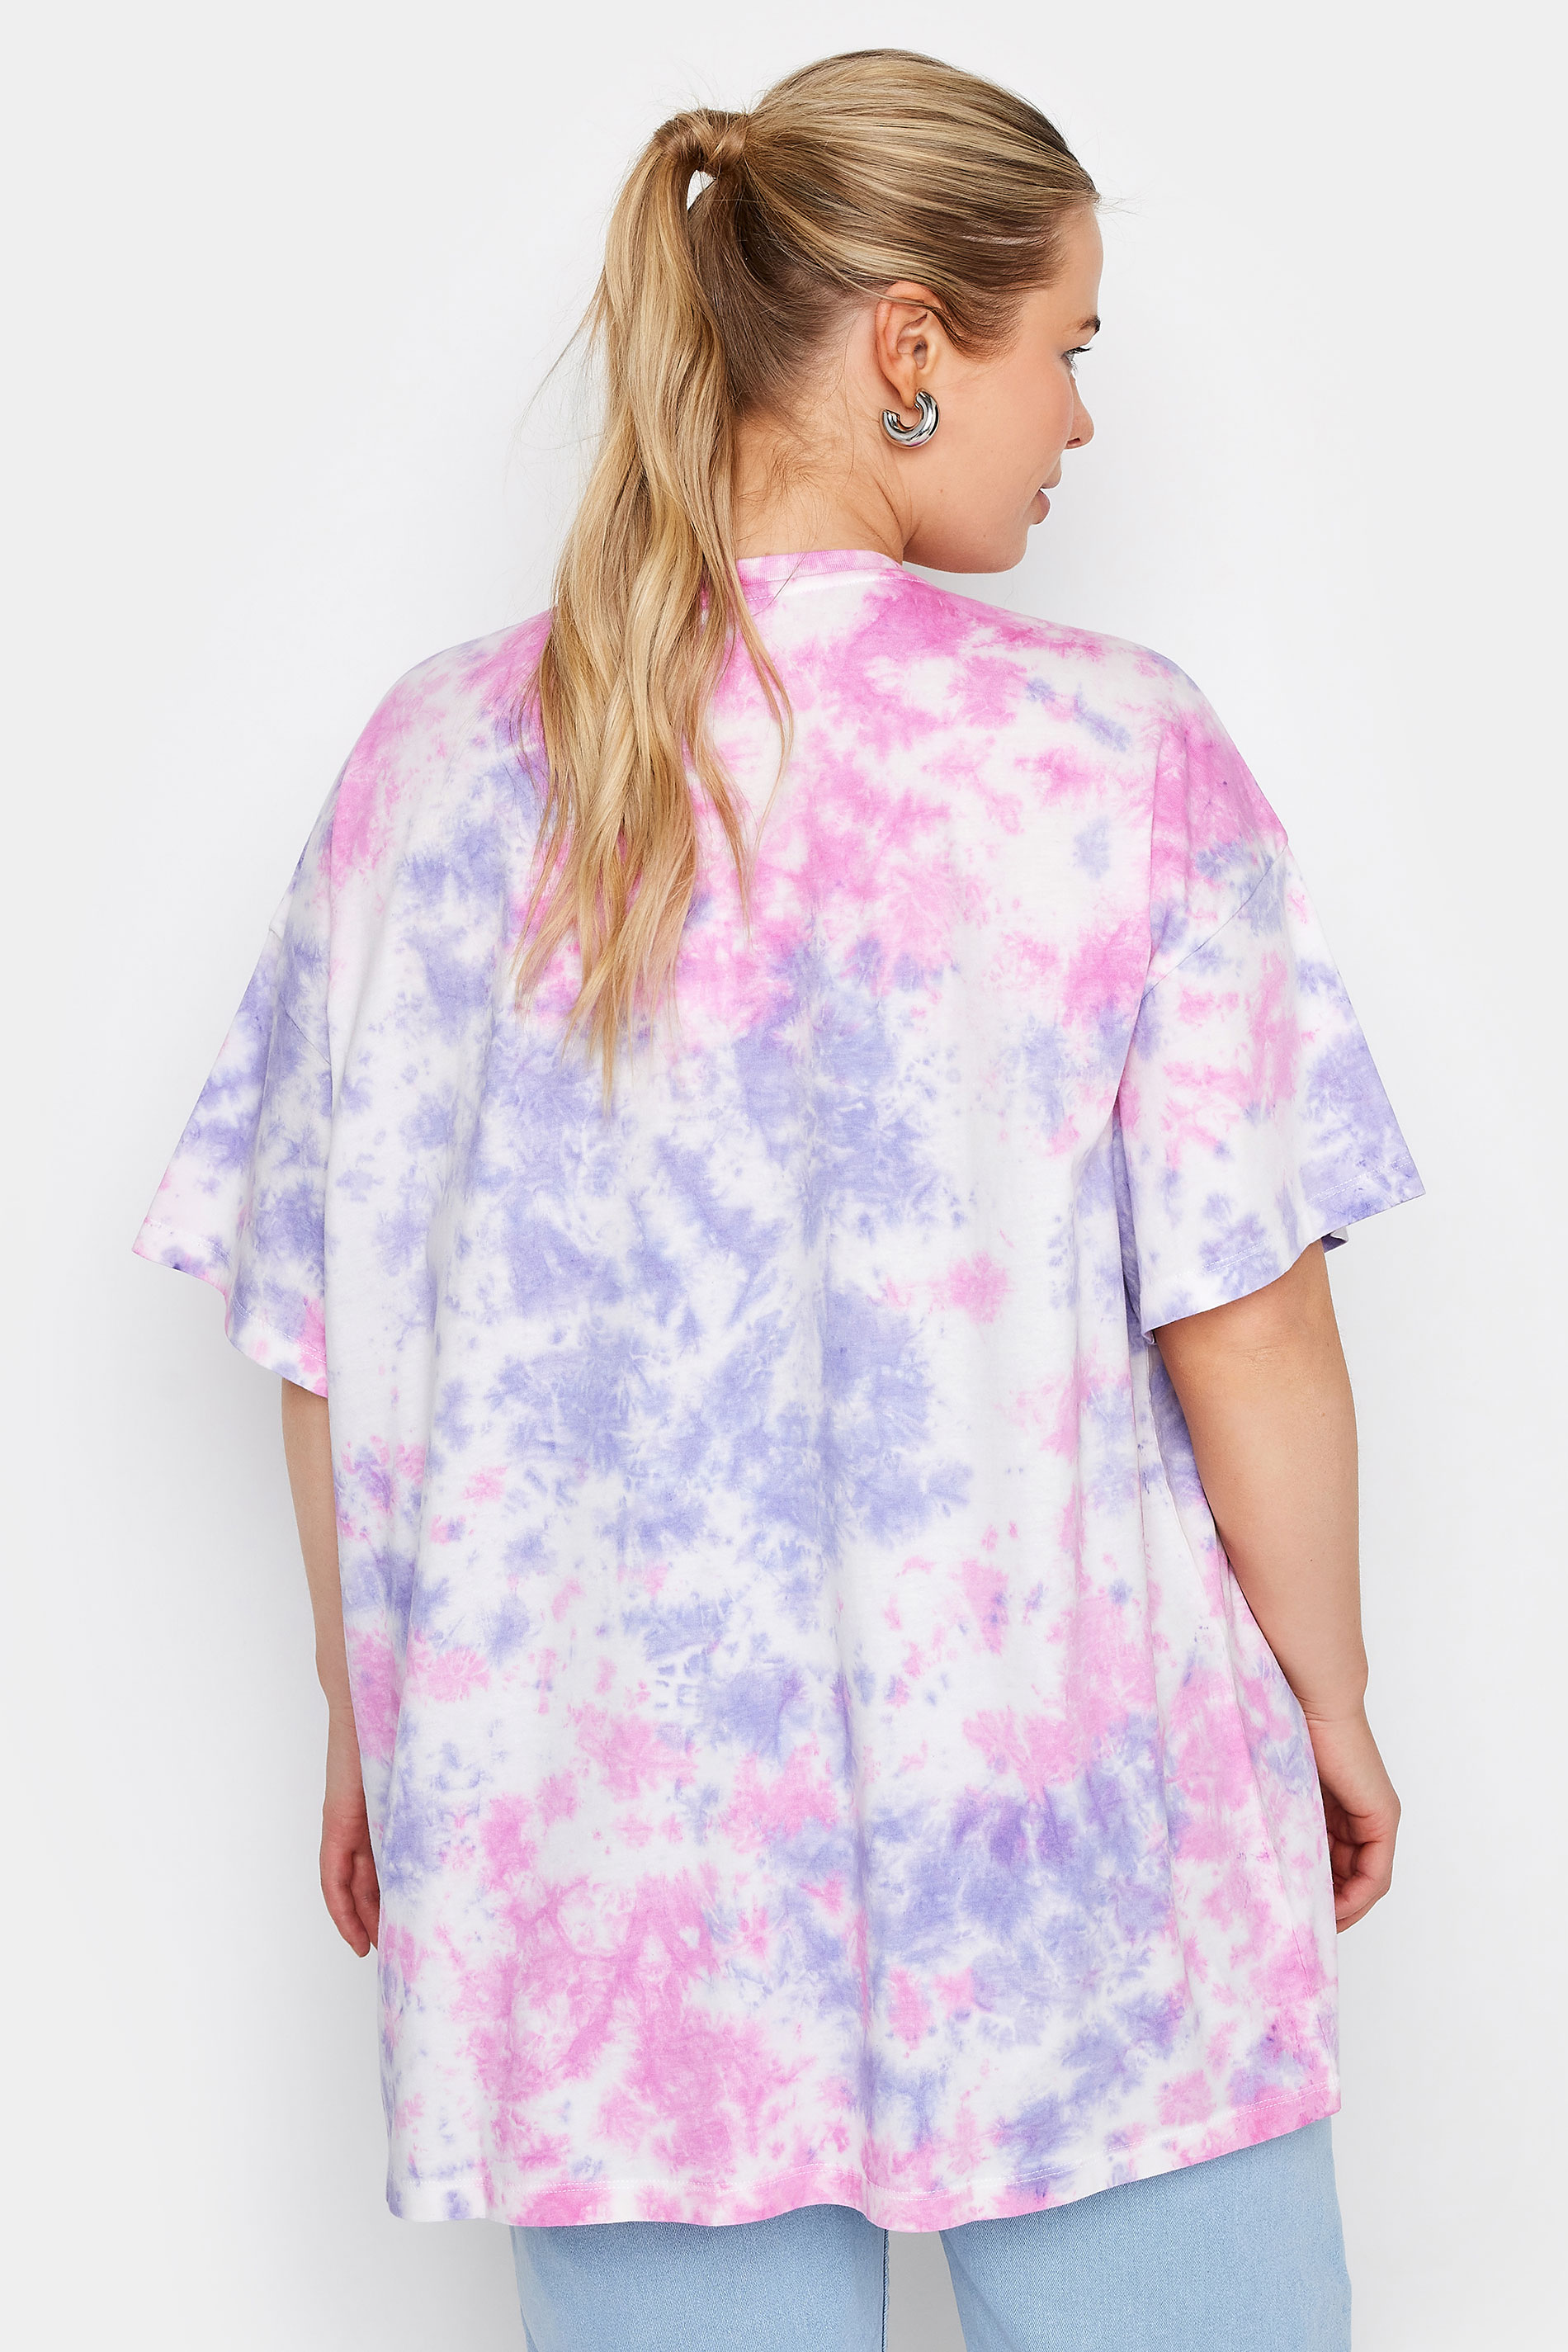 YOURS Plus Size Pink 'Ibiza Dreams' Print Tie Dye T-Shirt | Yours Clothing 3